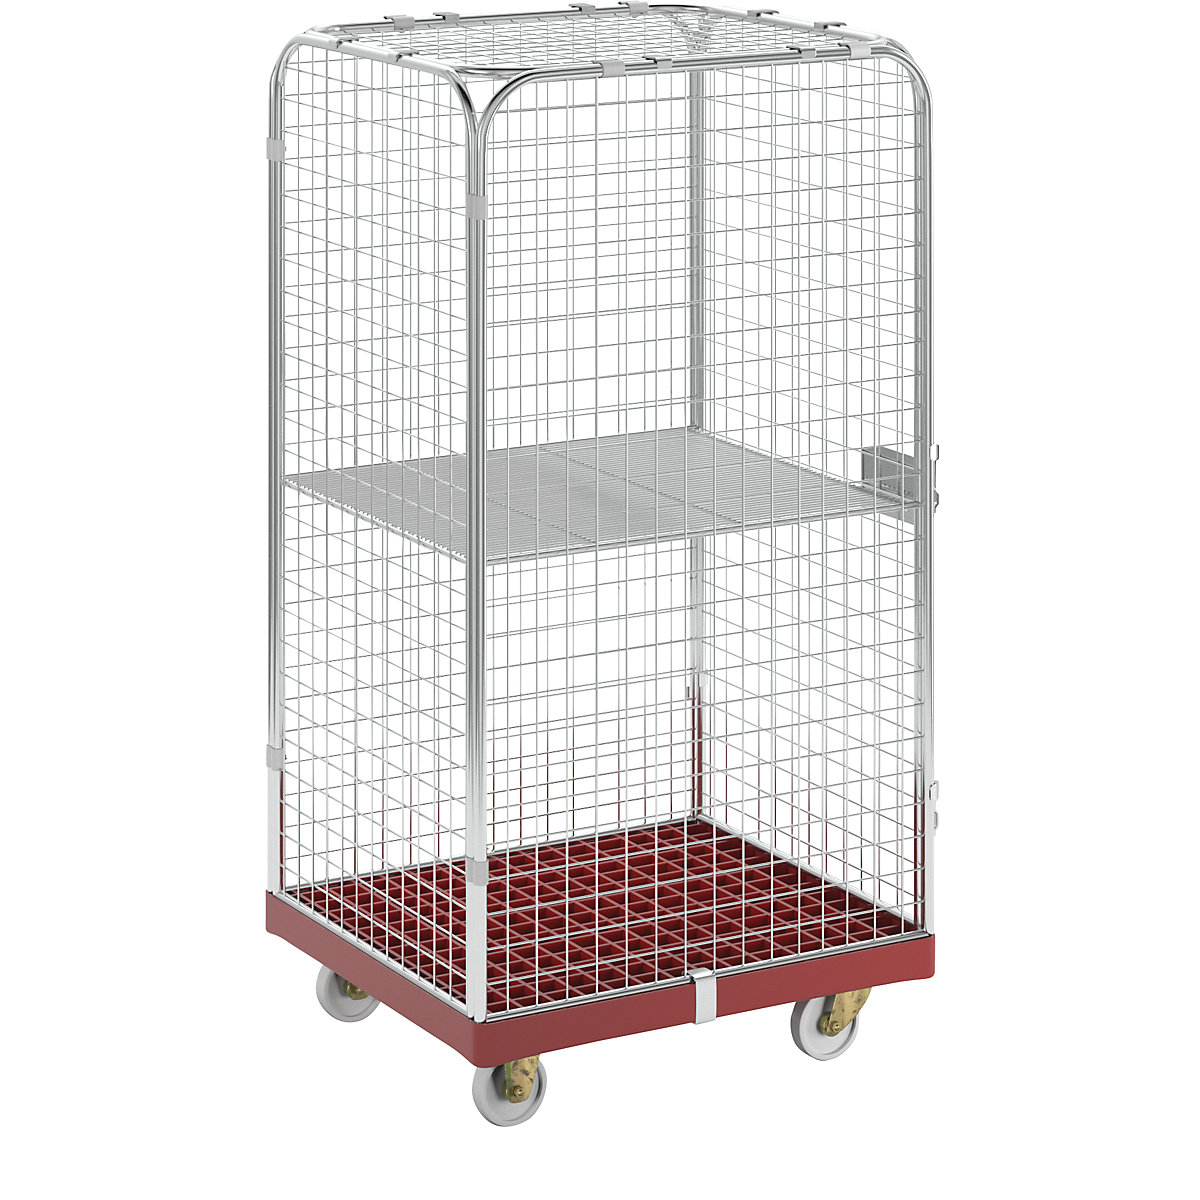 Rollcontainer SAFE, alt. x largh. x prof. 1550 x 720 x 810 mm, pianale con ruote rosso-2